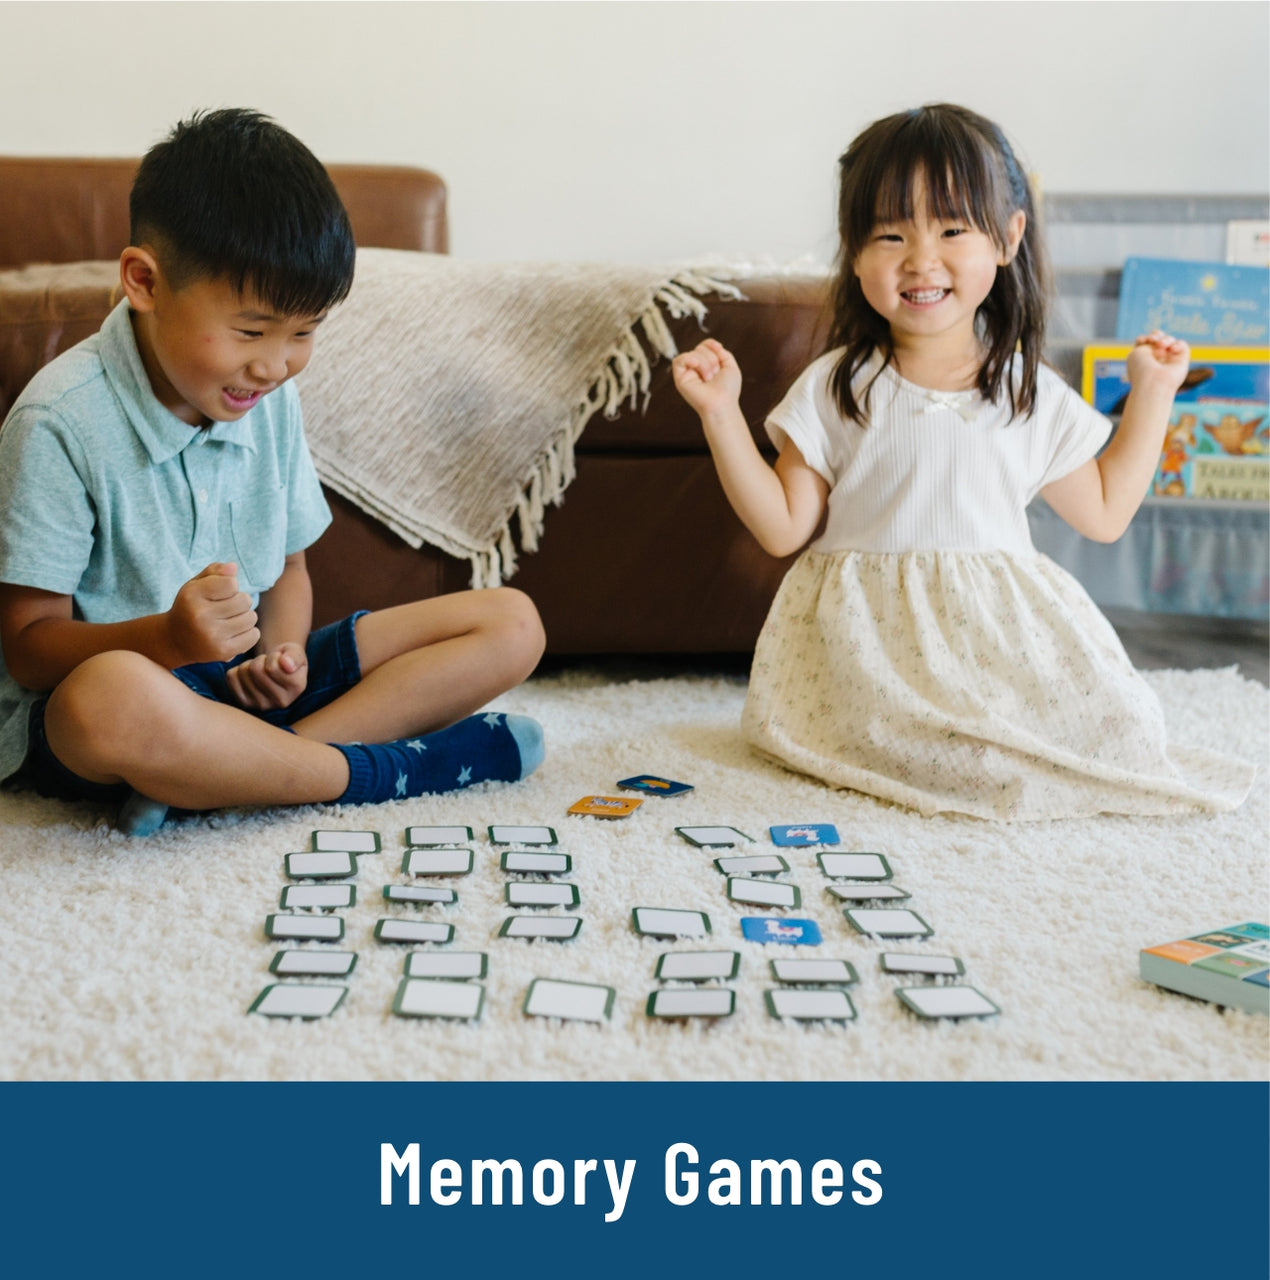 little boy and little girl sitting on white rug with memory cards flipped upside down, little girl showing excitement